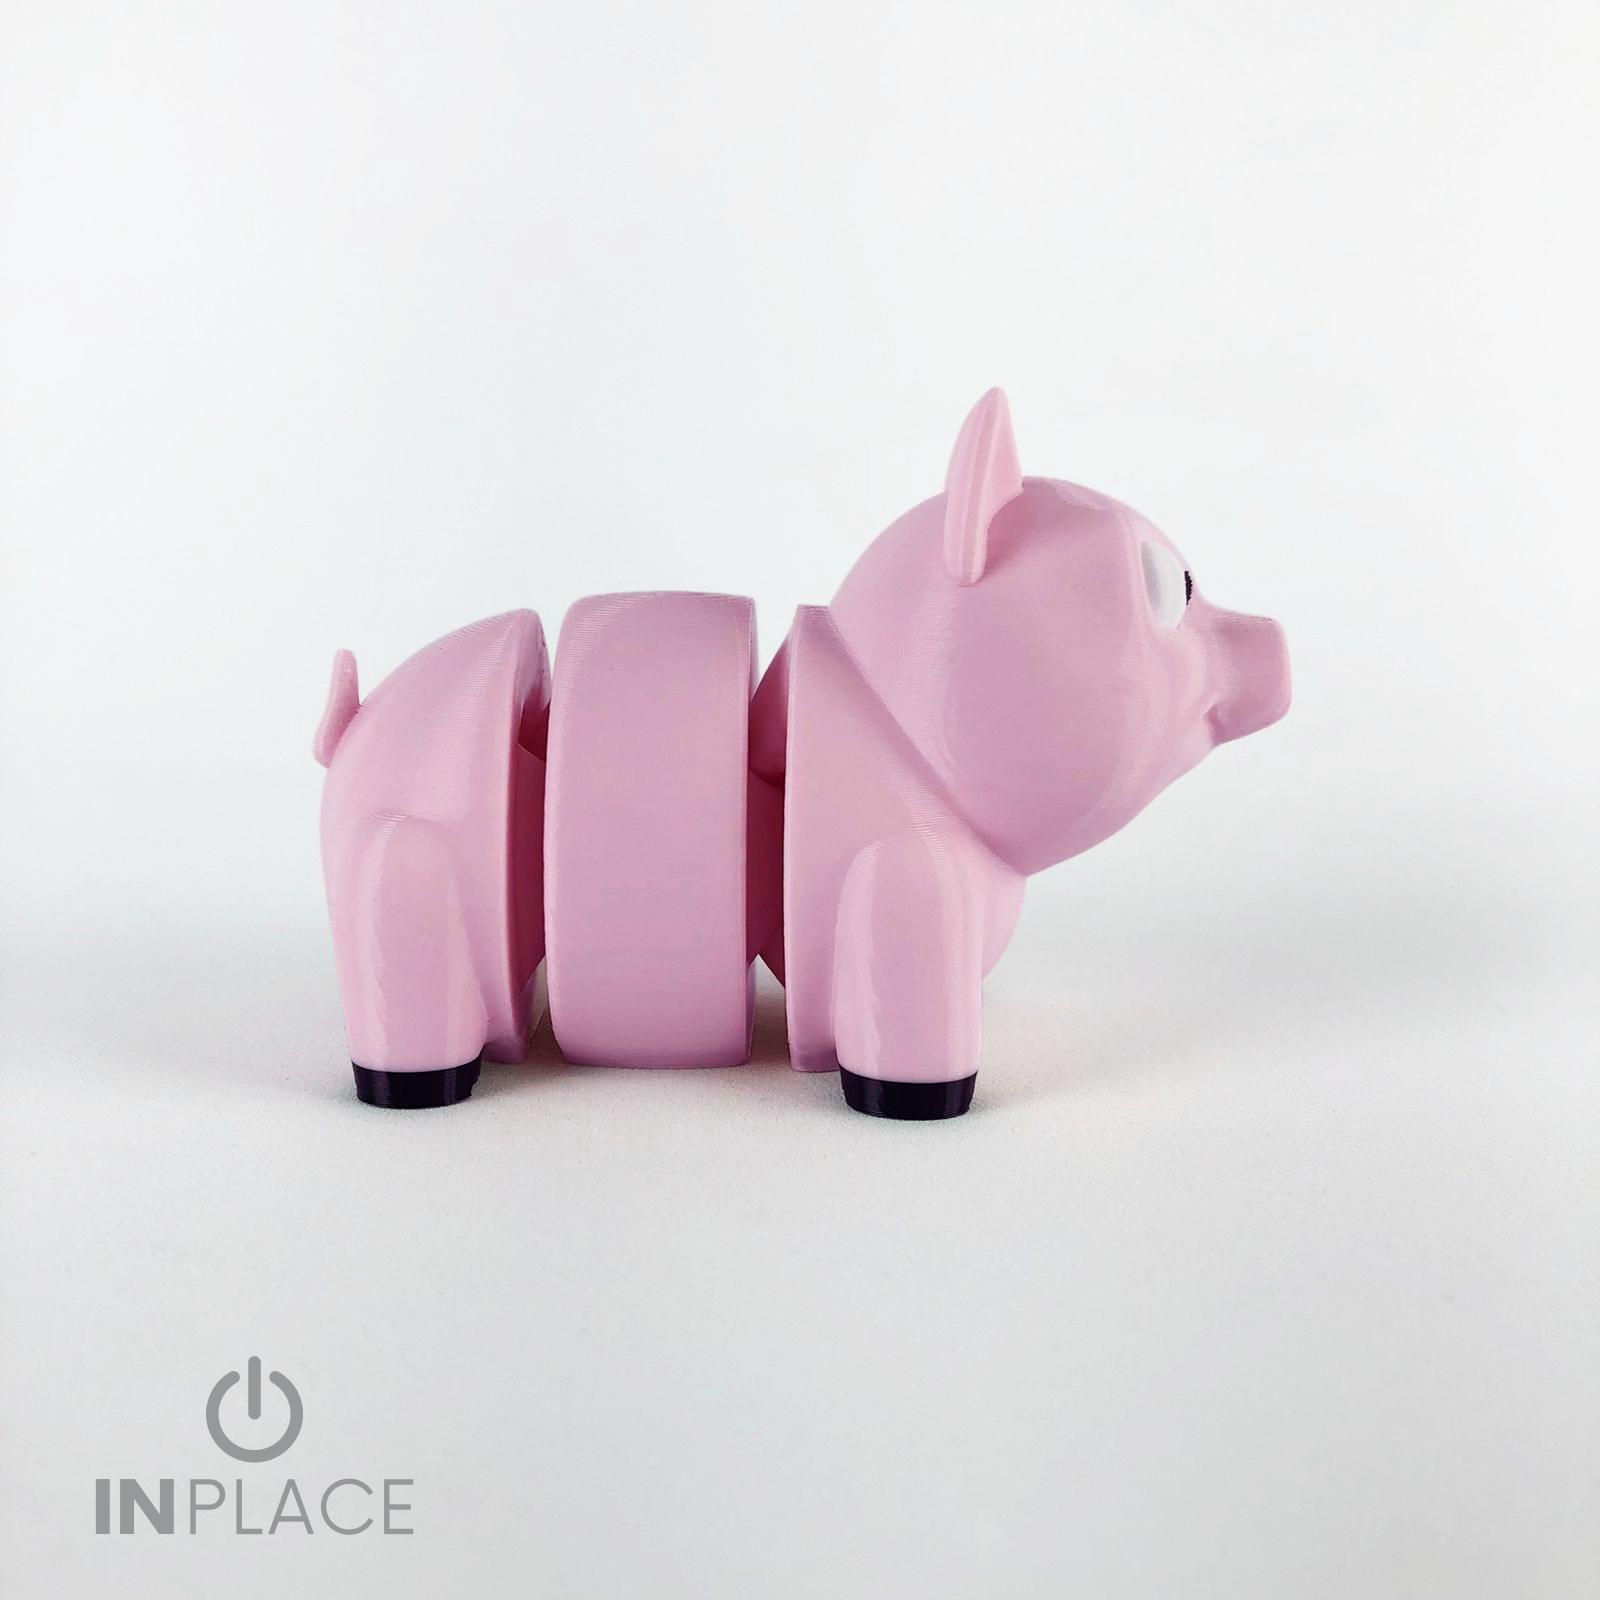 Baby Pig articulated 3d model